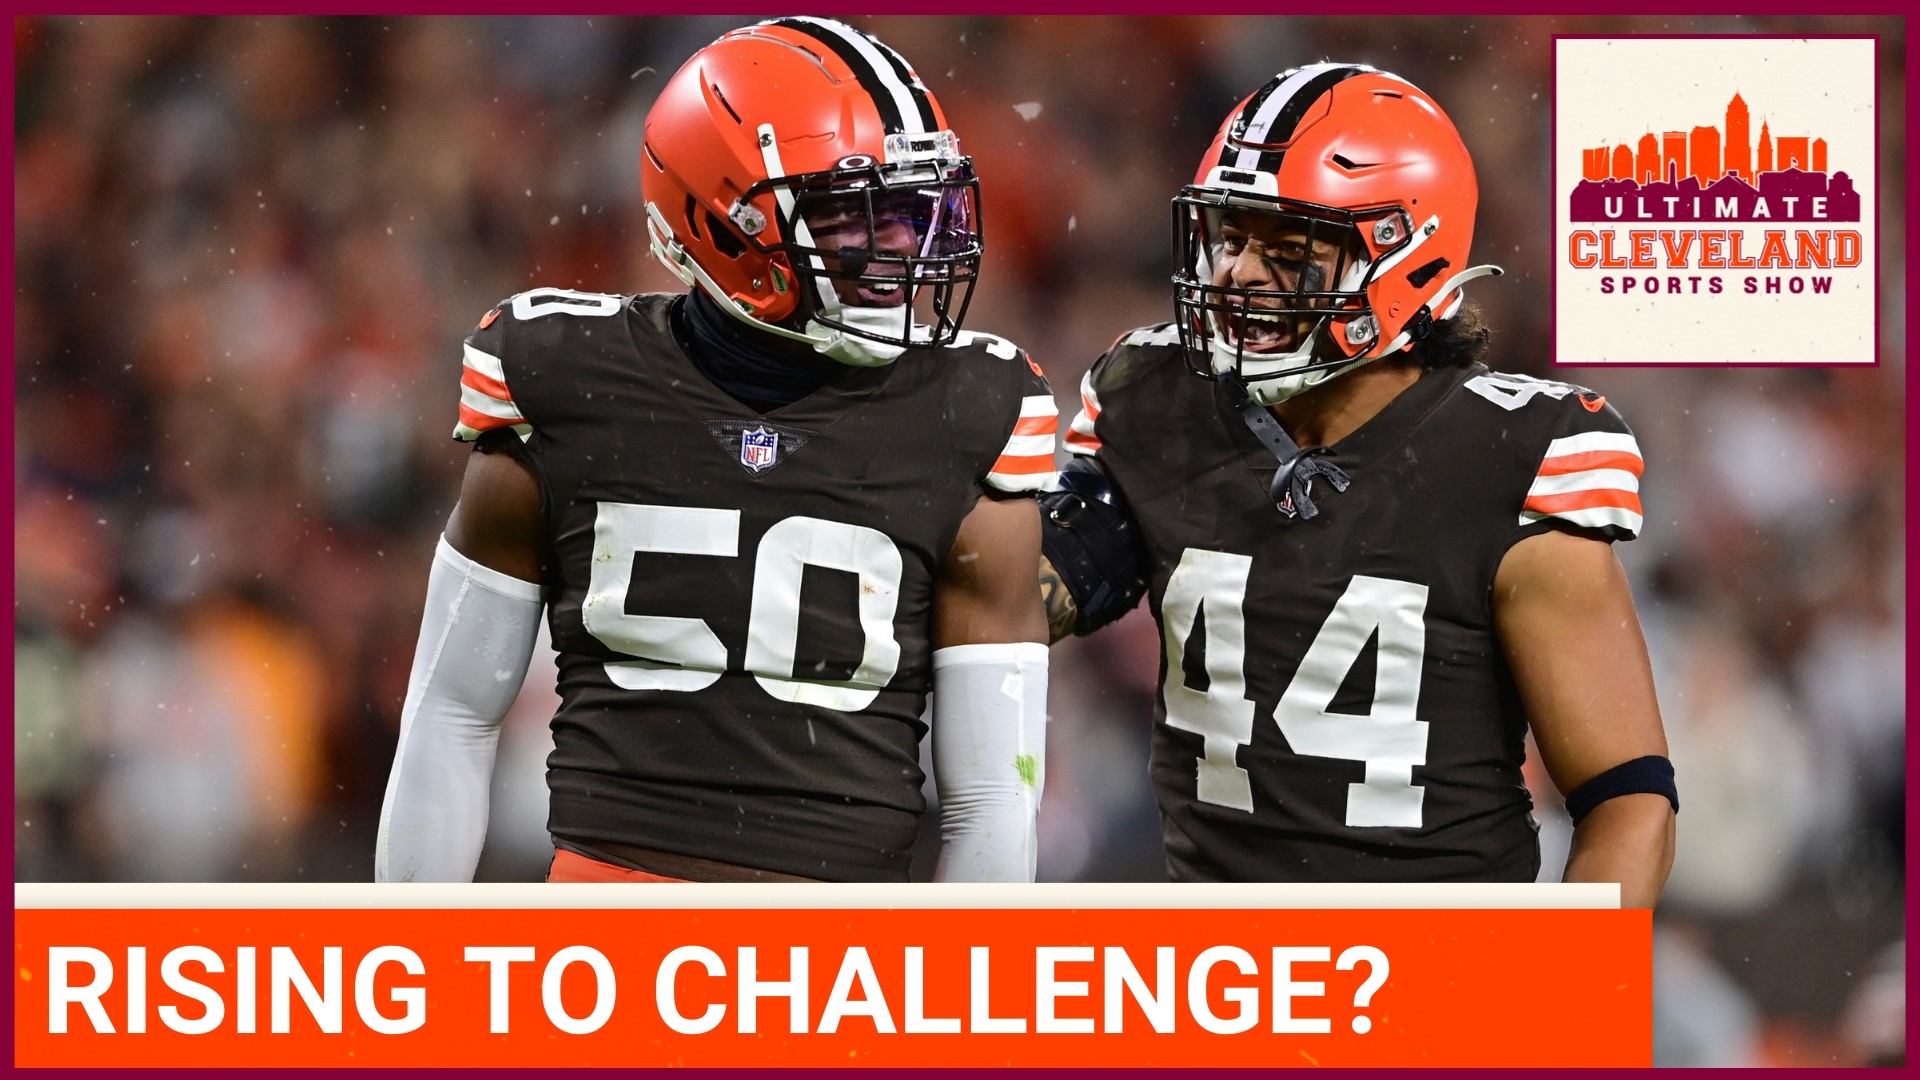 With so much uncertainty right now around the Cleveland Browns defense, are other guys ready to step up?